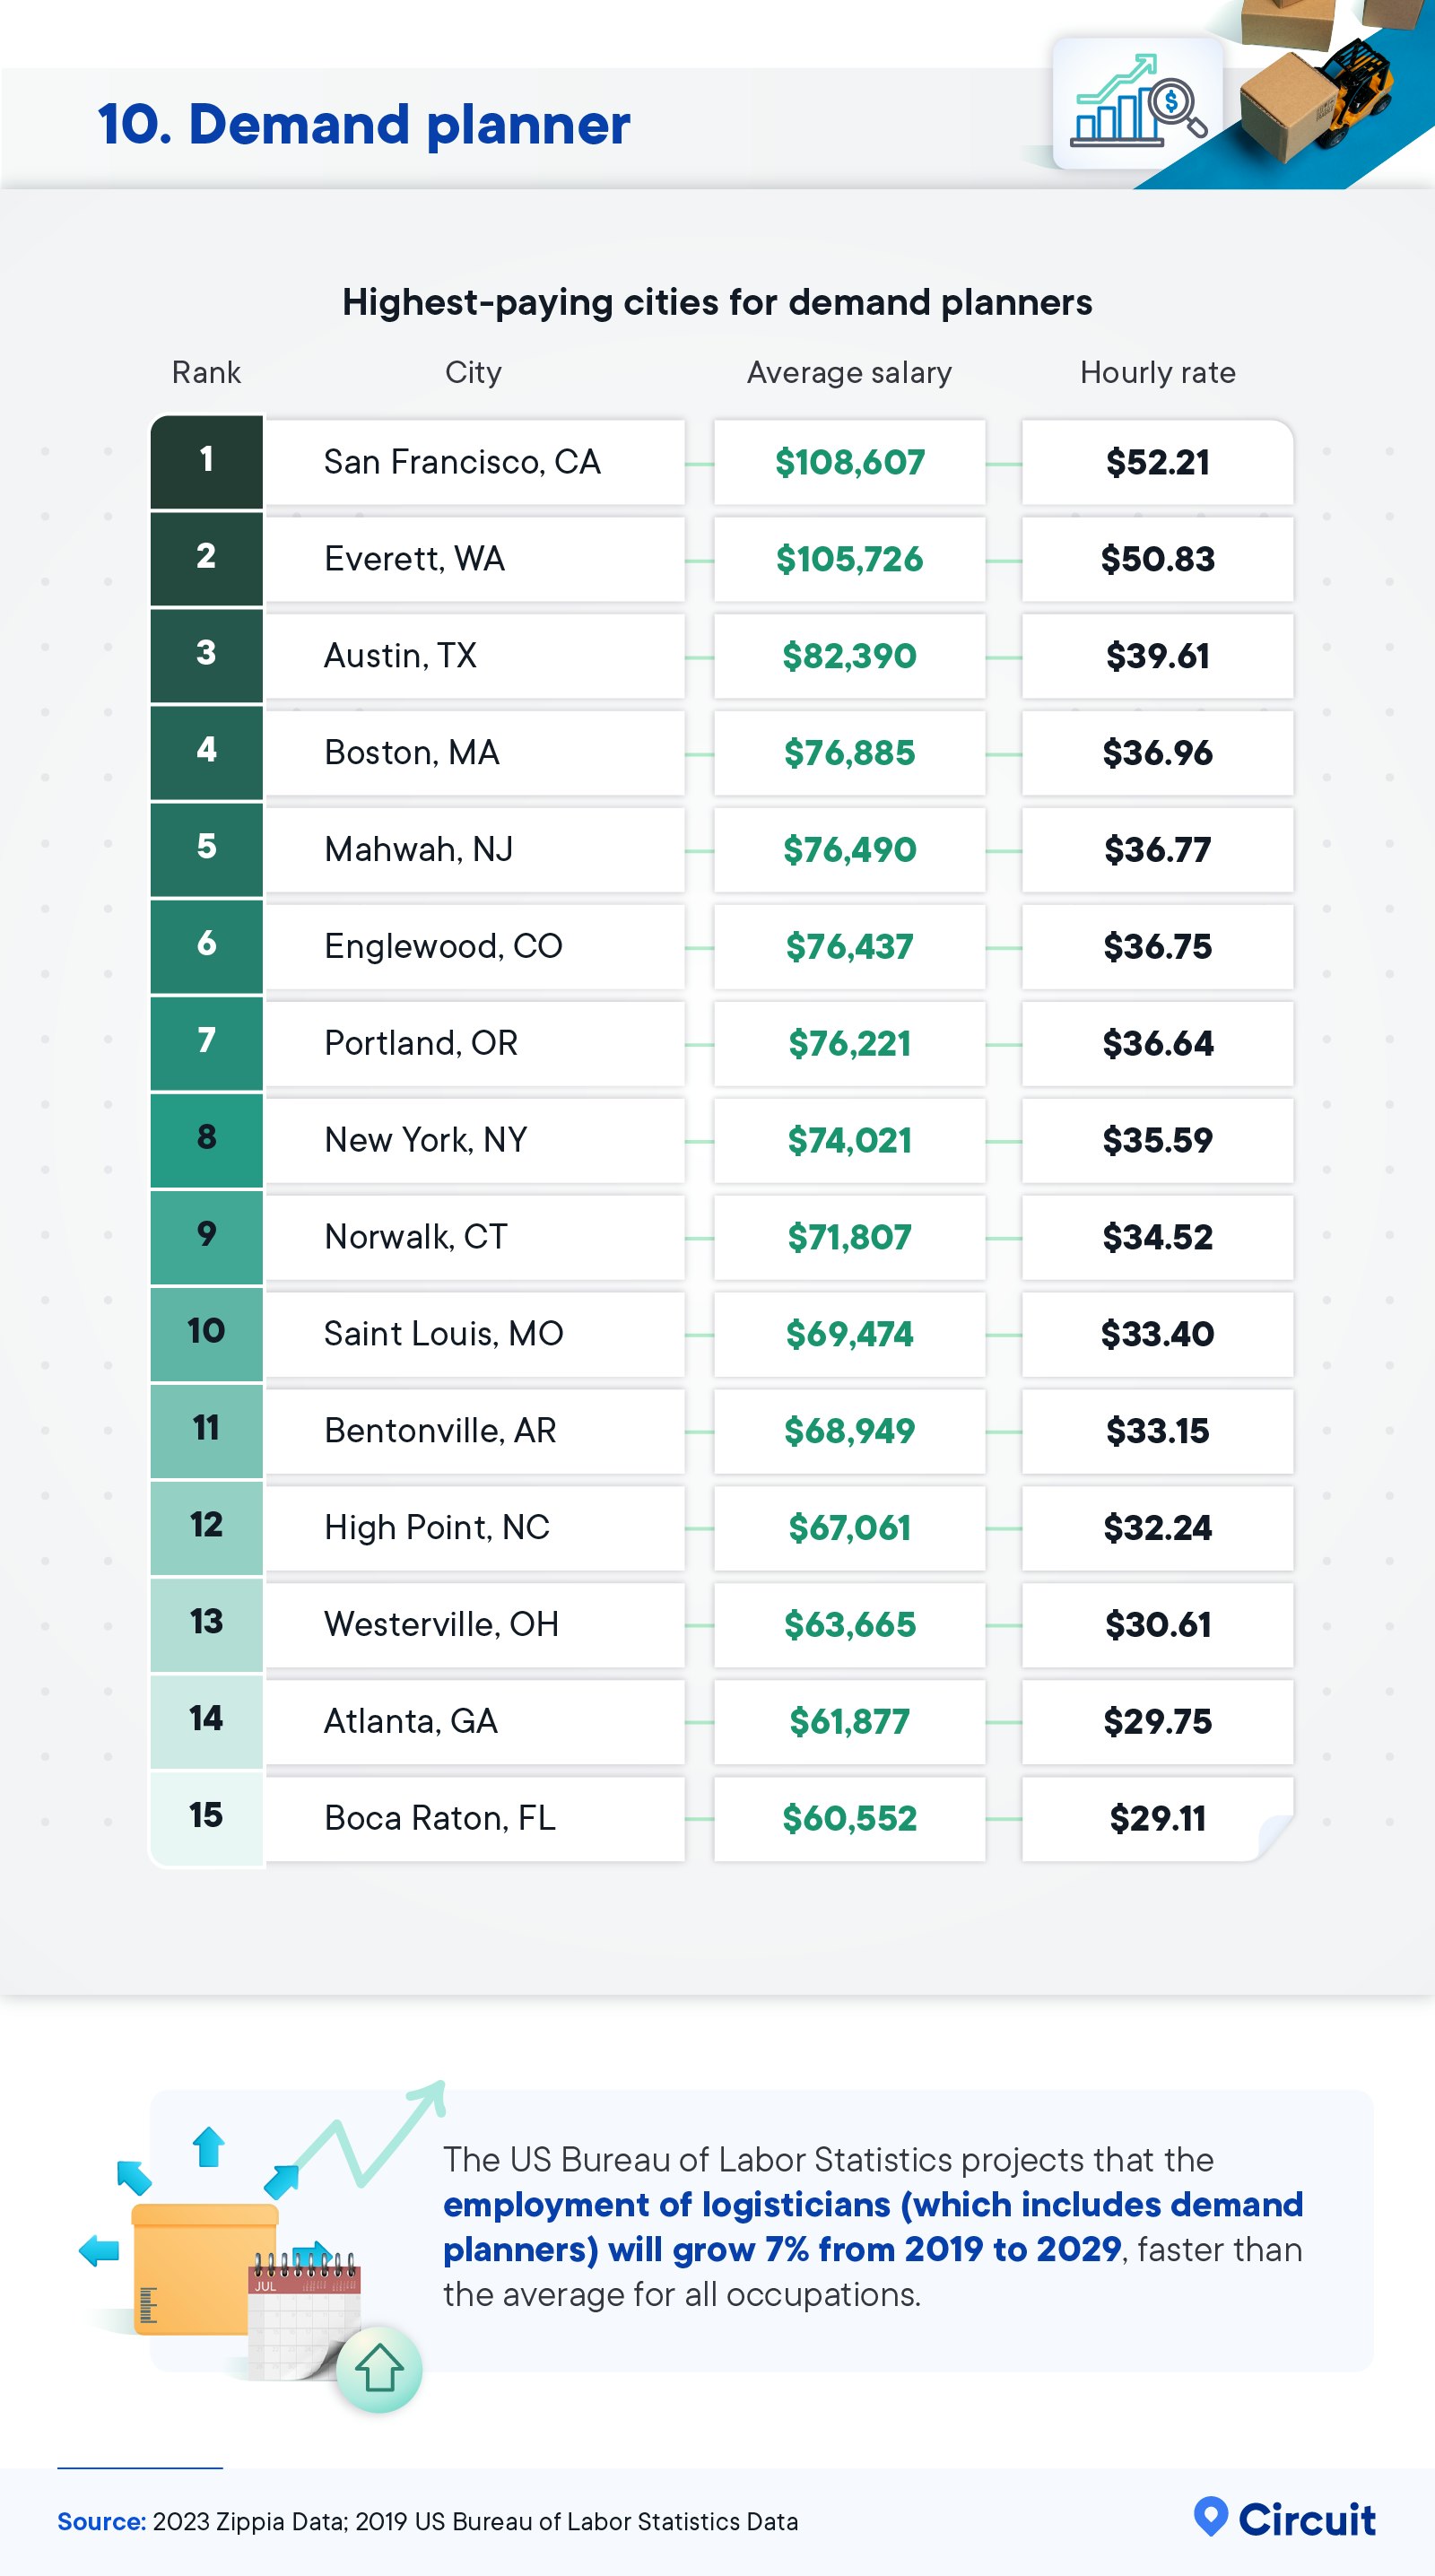 Highest-paying cities for demand planners